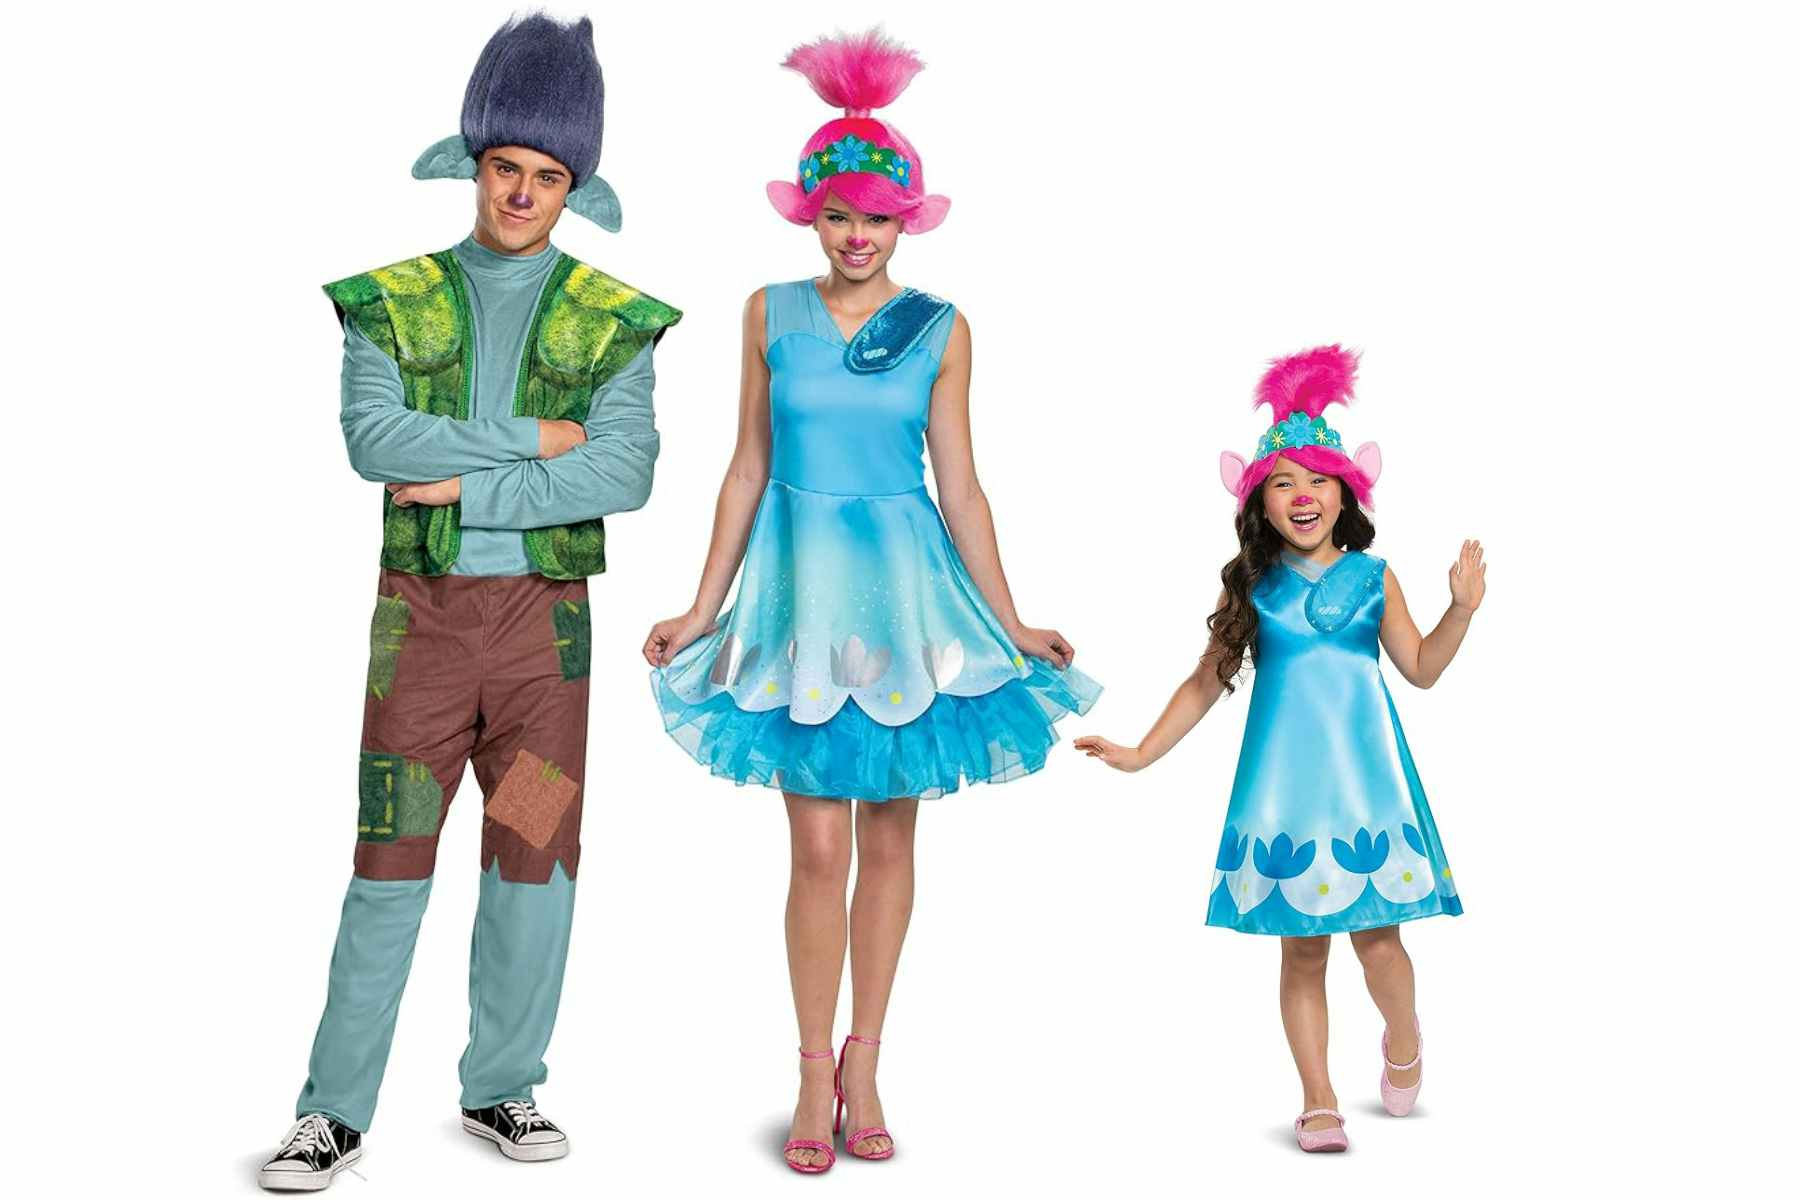 images of a family halloween costume of trolls the movie